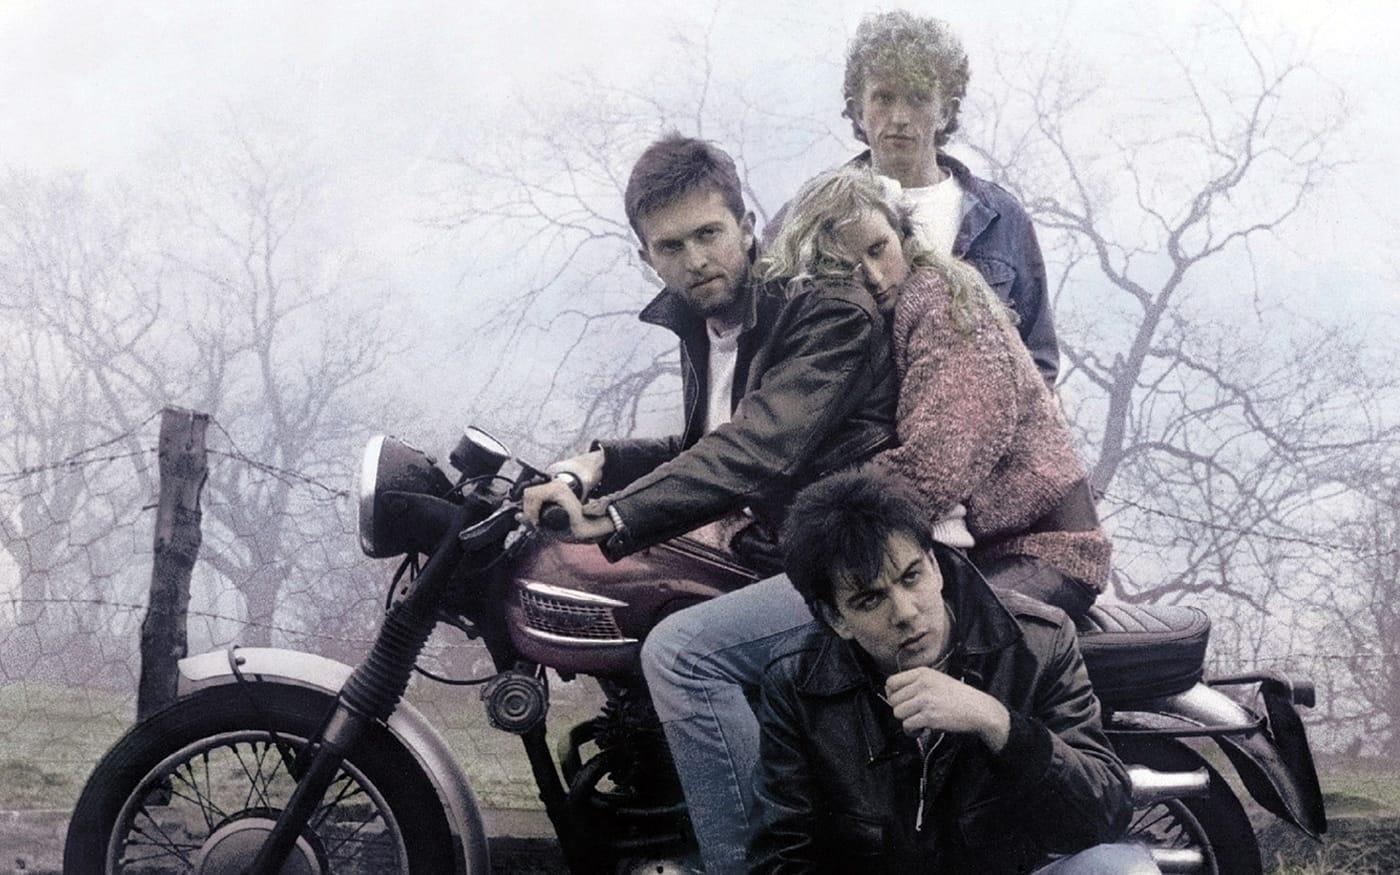 A photo of Prefab Sprout in a foggy countryside with two of the members sitting on a motorcycle